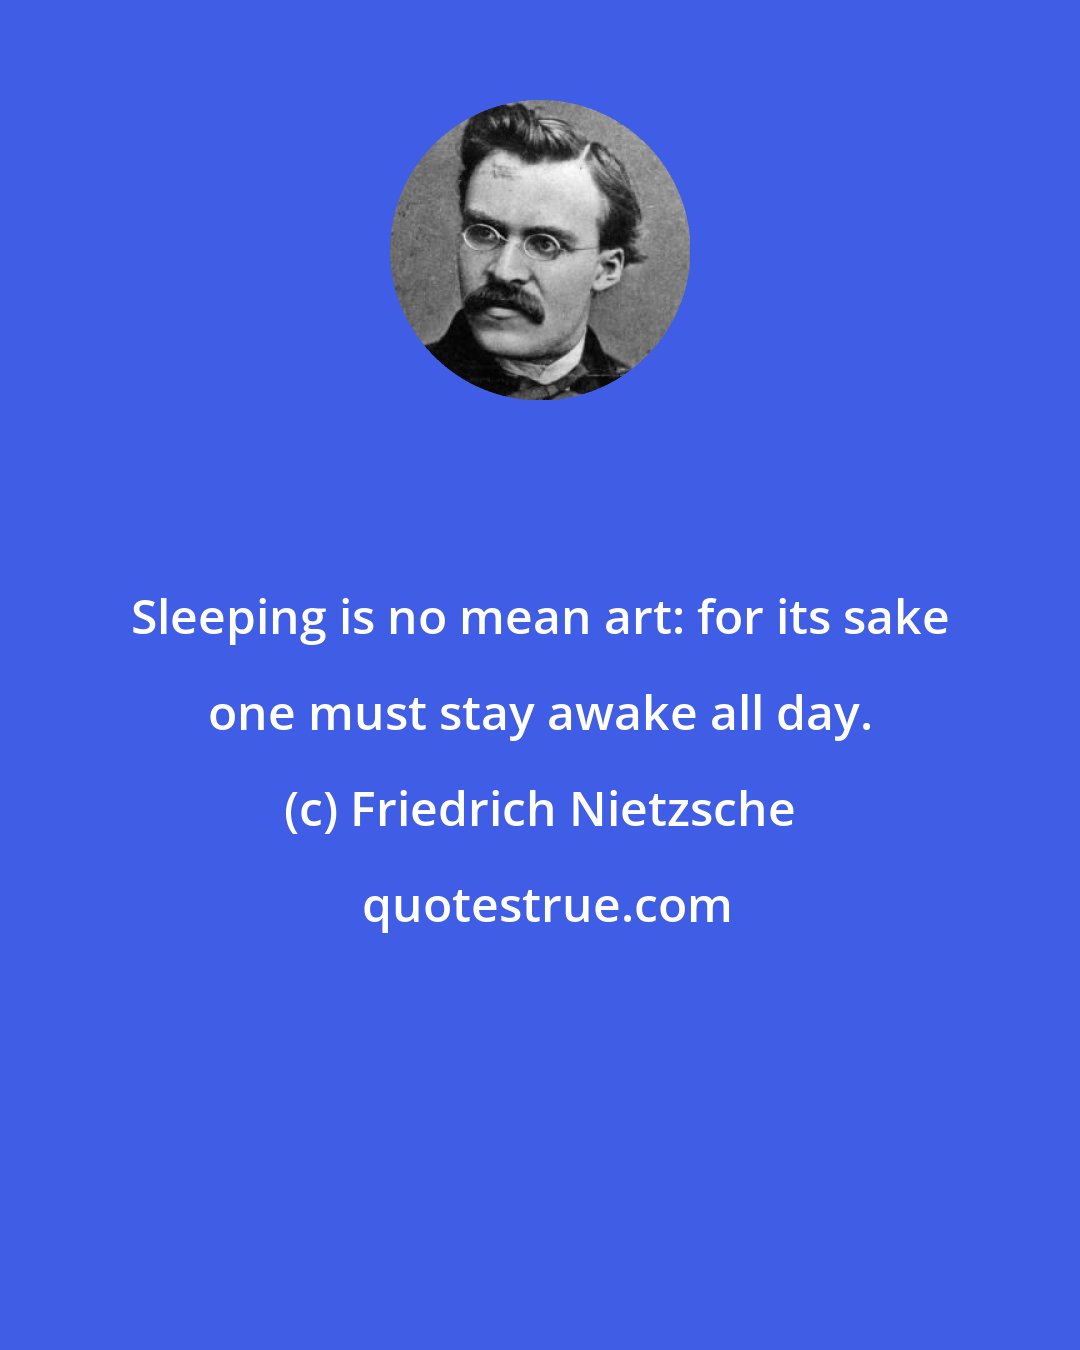 Friedrich Nietzsche: Sleeping is no mean art: for its sake one must stay awake all day.